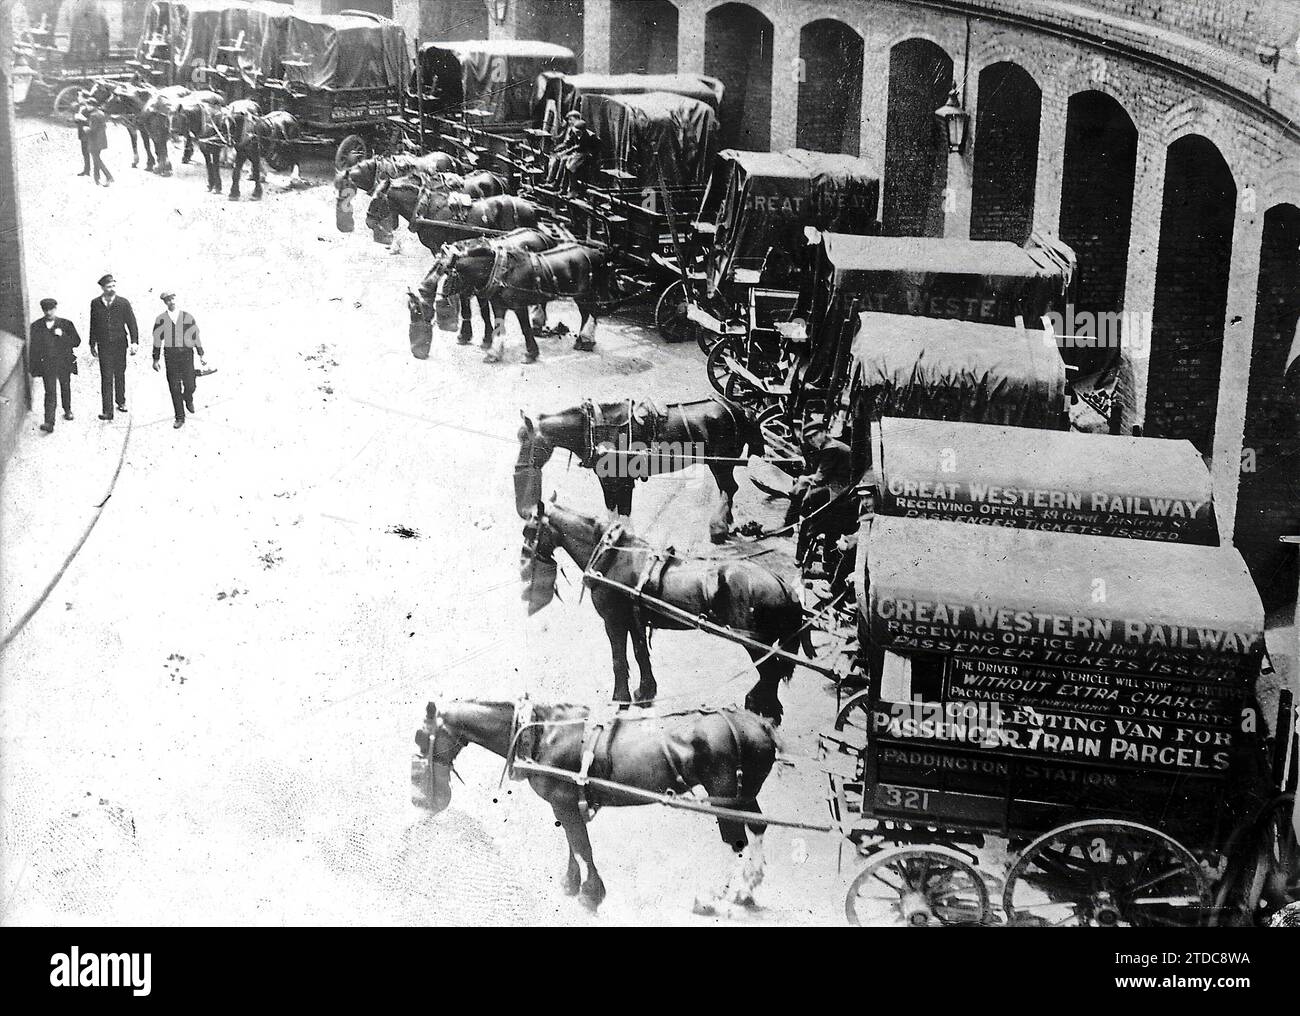 London (United Kingdom), 08/12/1911. Dockers strike in London. Cars delivering goods at a station unable to leave because strikers prevented them. Credit: Album / Archivo ABC / Charles Delius Stock Photo